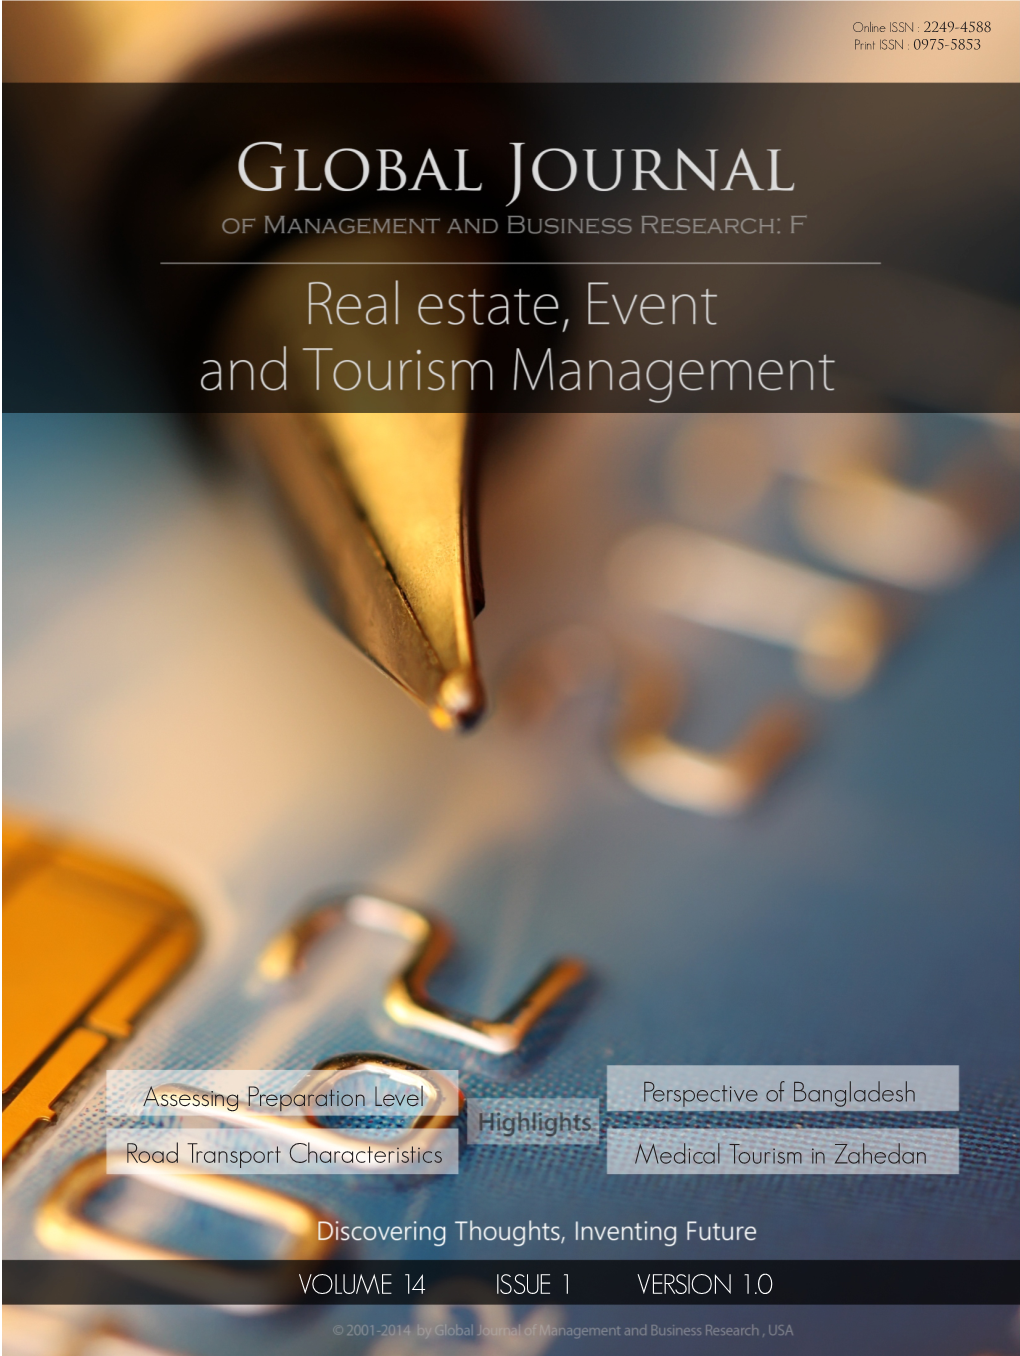 Global Journal of Management and Business Research: � Real Estate E� Ent � � Ourism Management